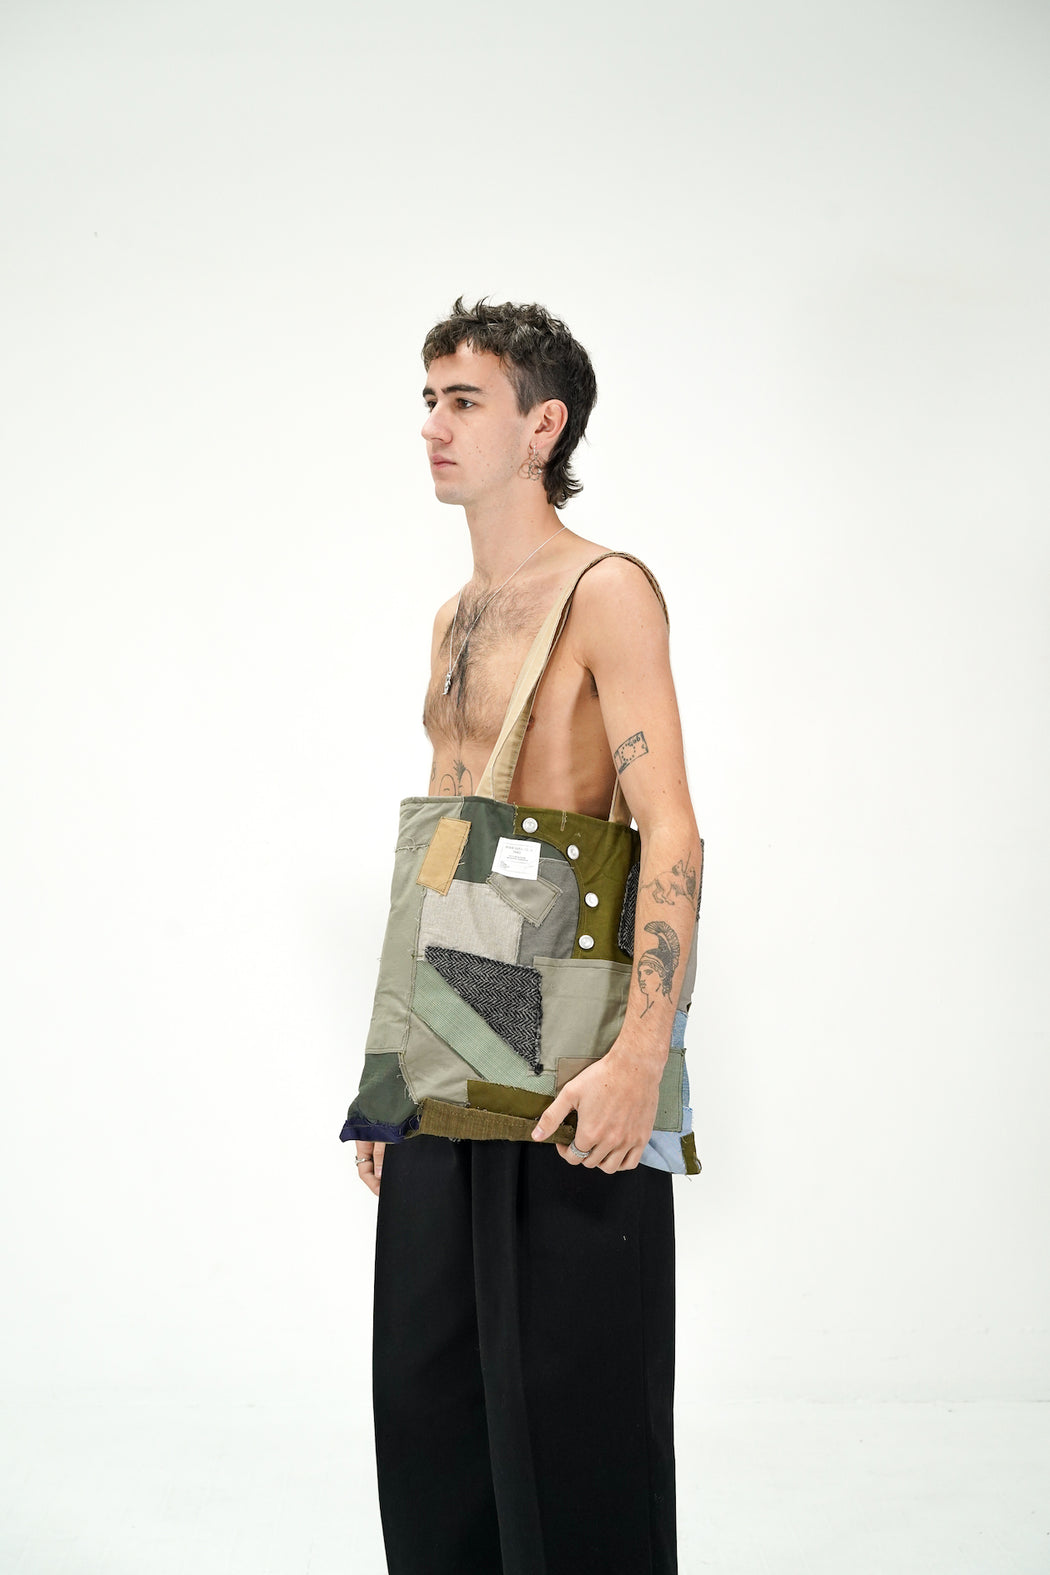 TOTE BAG UPCYCLING VÊTEMENTS MILITAIRE ZERO WASTE N°4